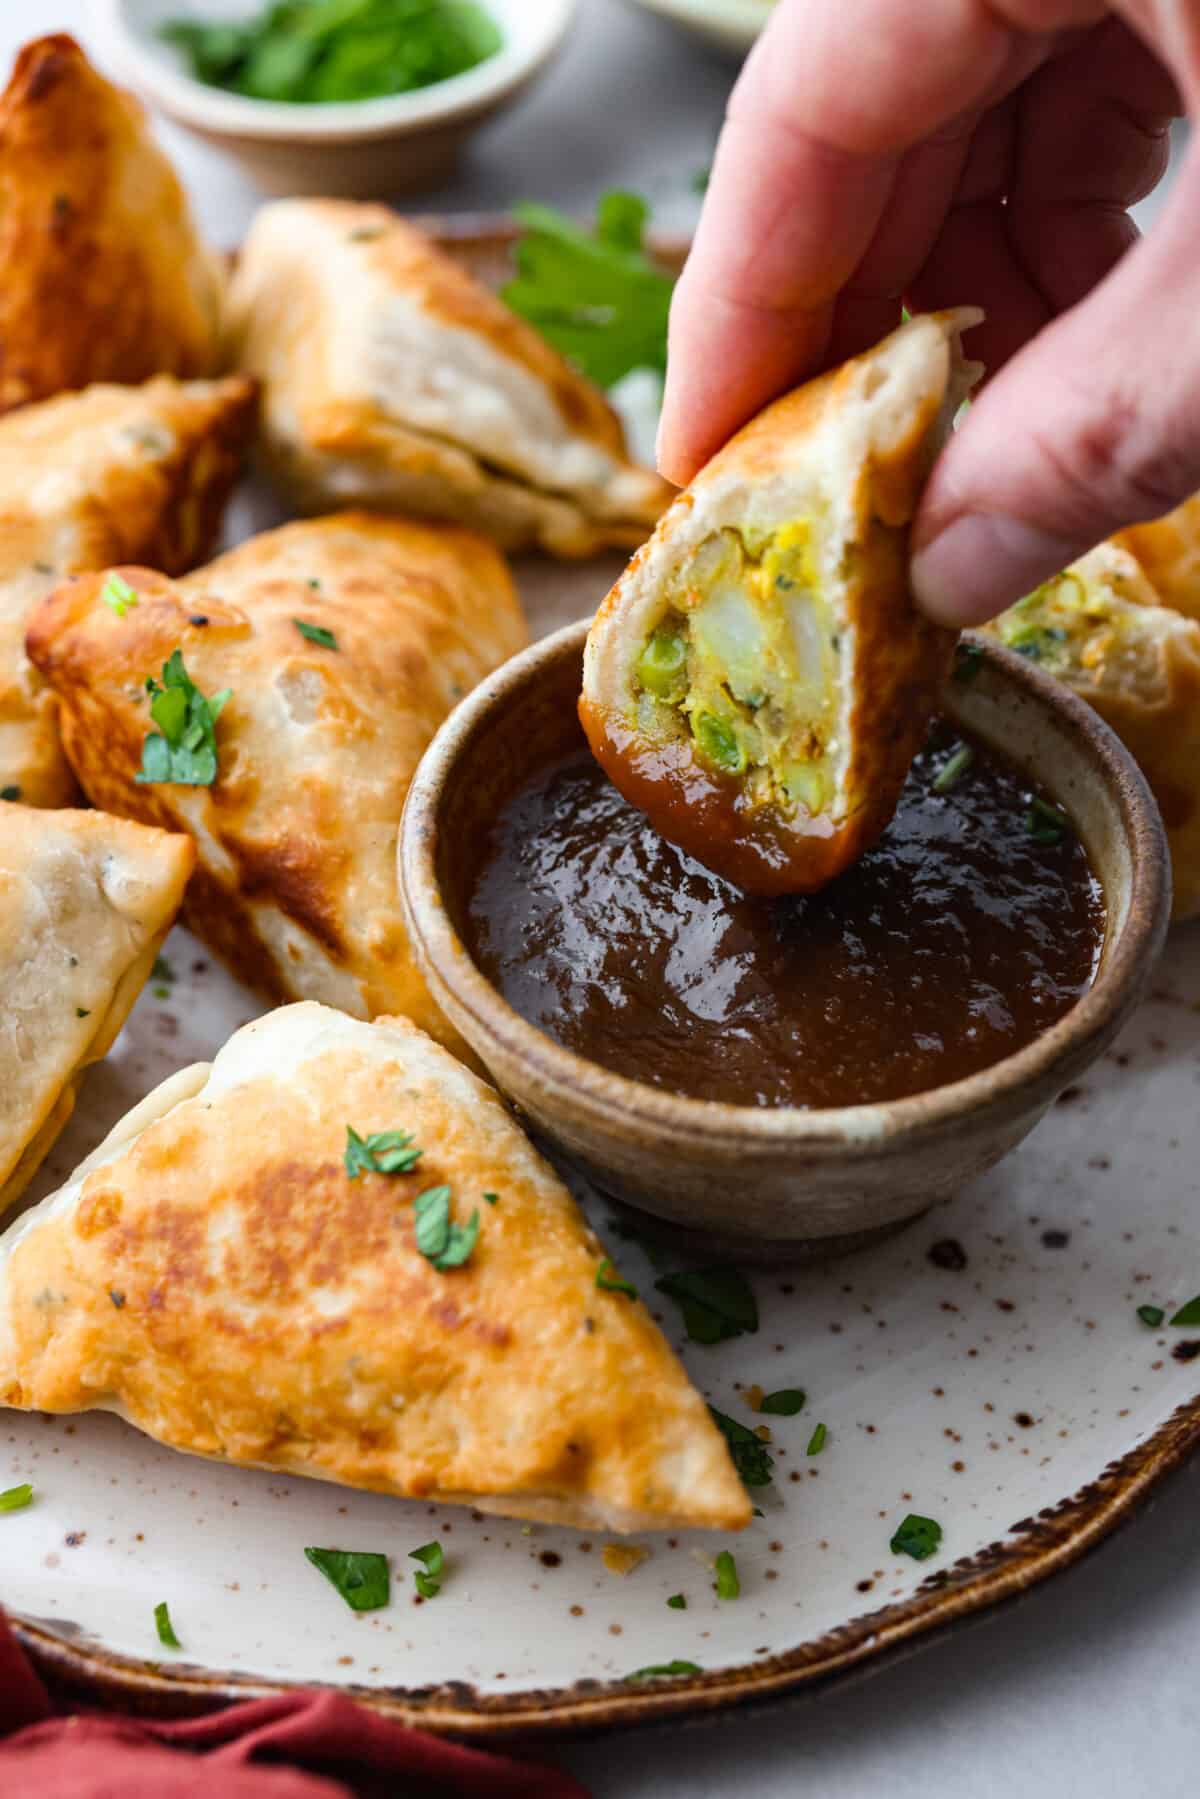 Dipping half of a samosa into a thick, red tamarind sauce.